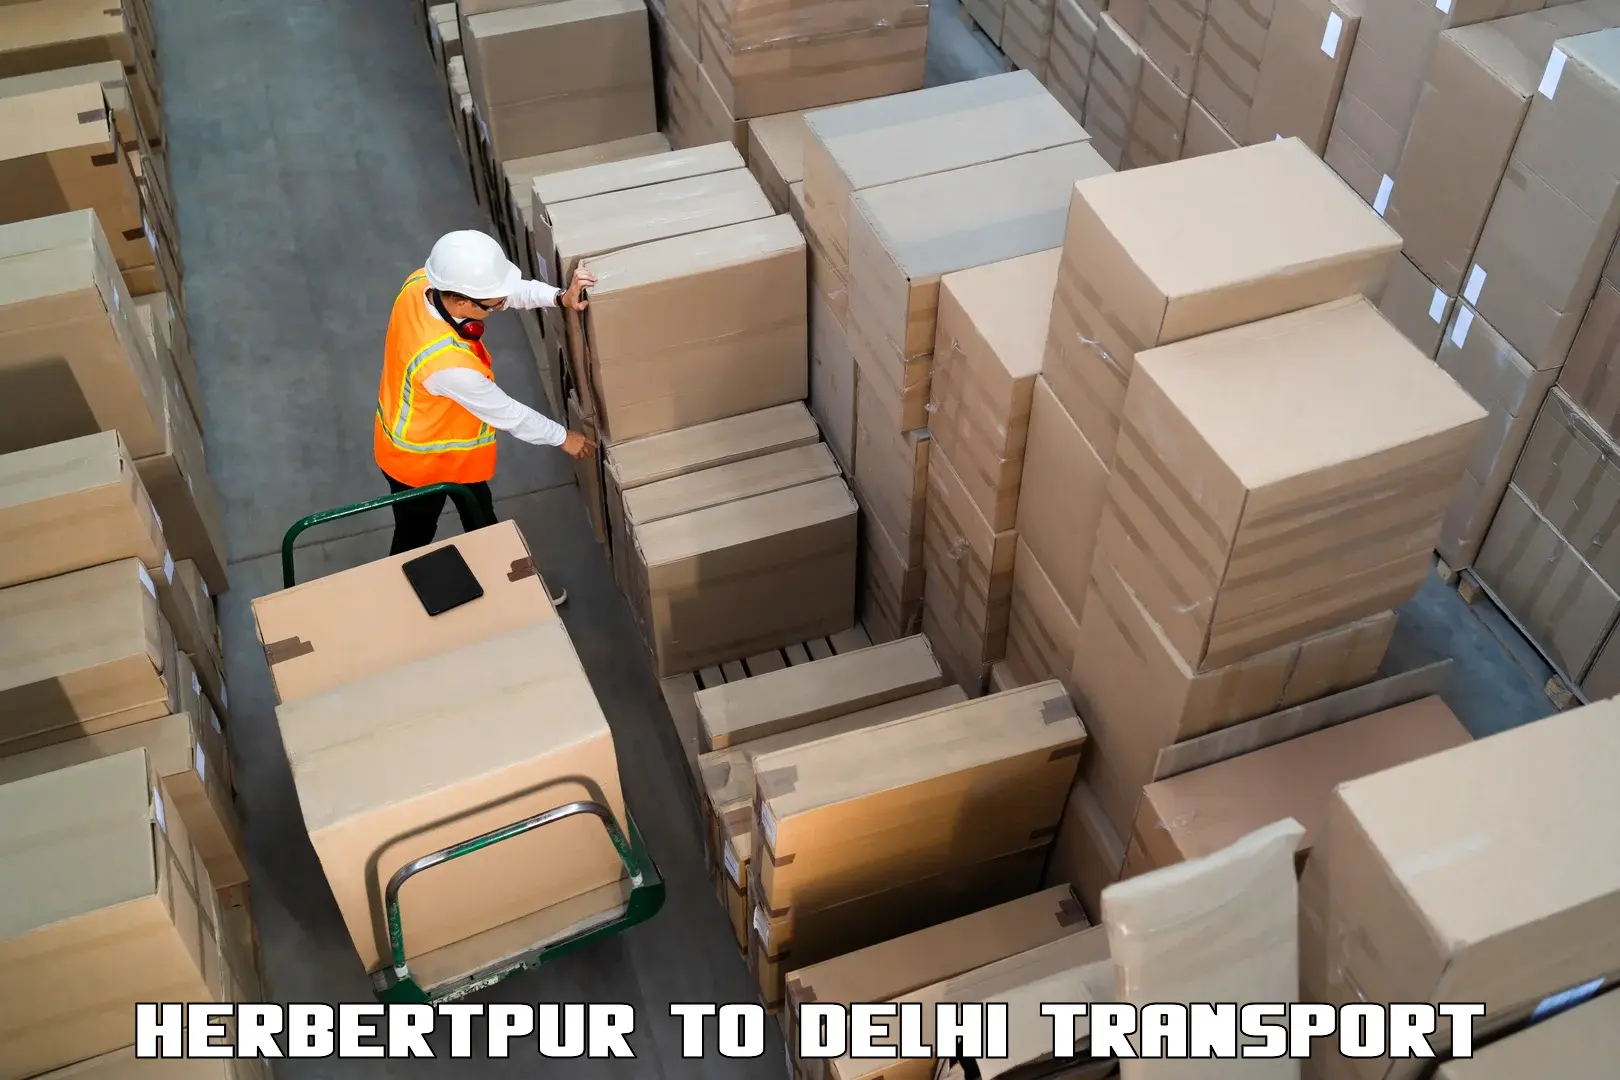 Transport bike from one state to another Herbertpur to University of Delhi